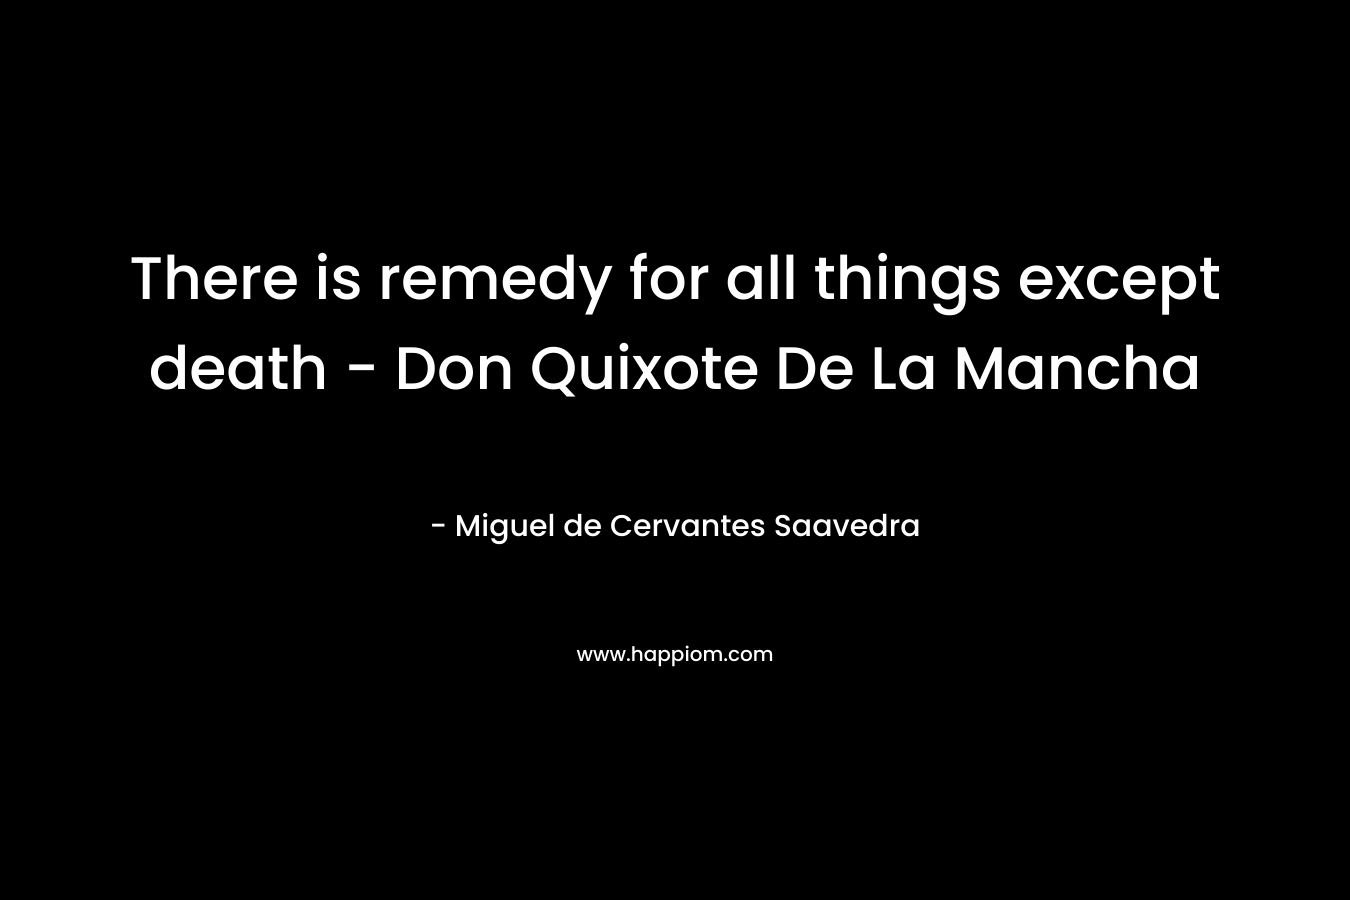 There is remedy for all things except death - Don Quixote De La Mancha